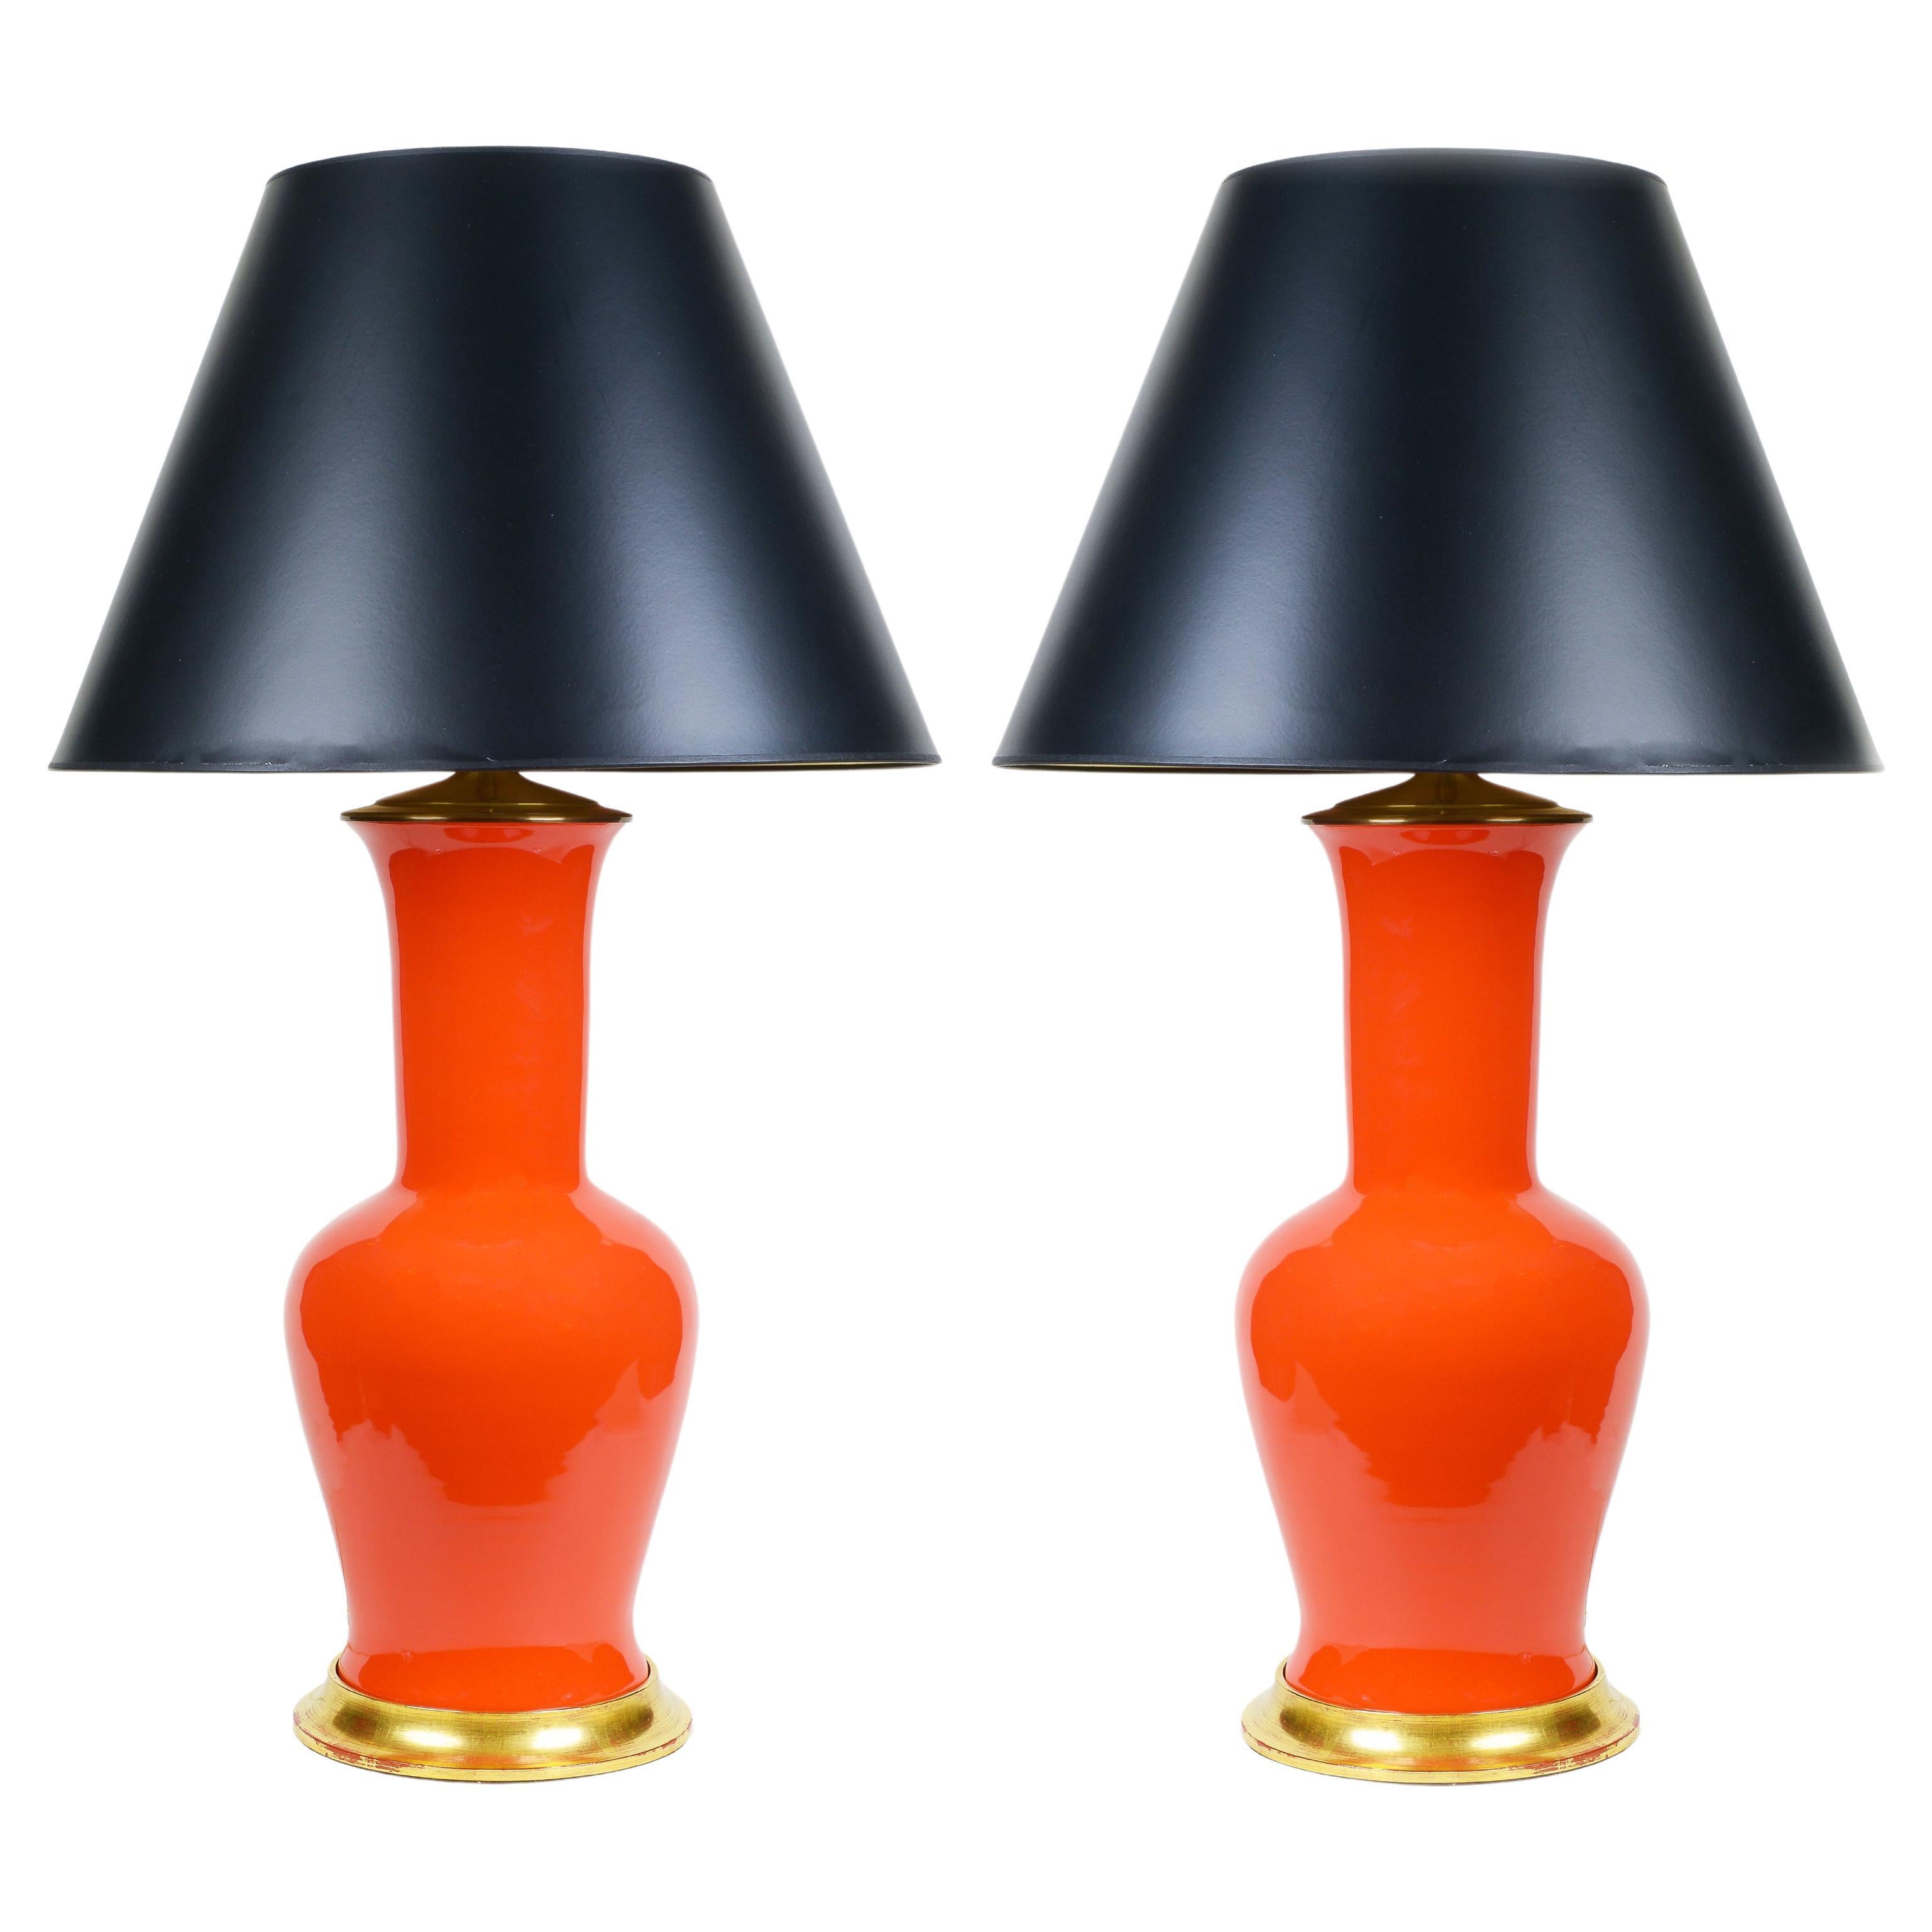 A Pair of Christopher Spitzmiller 'Garniture' Ceramic Lamps in Coral For Sale